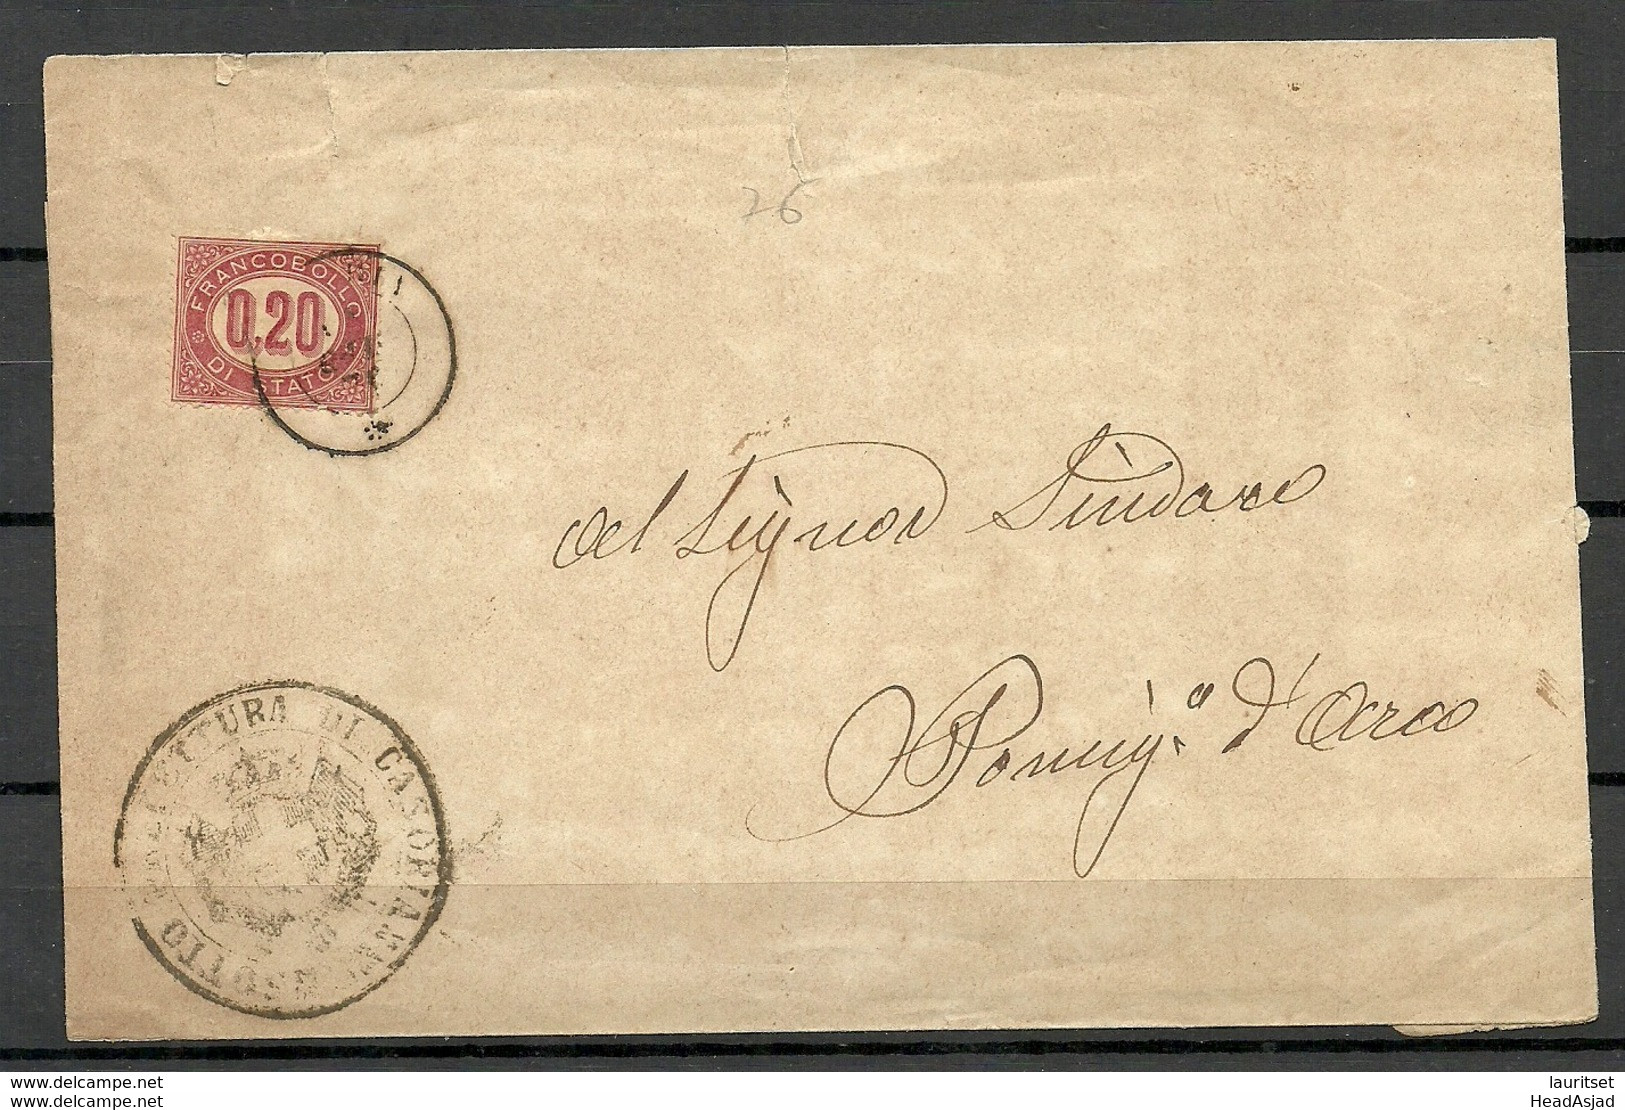 ITALY 1878 Cover Michel 3 Duty Stamp Official As Single - Dienstzegels